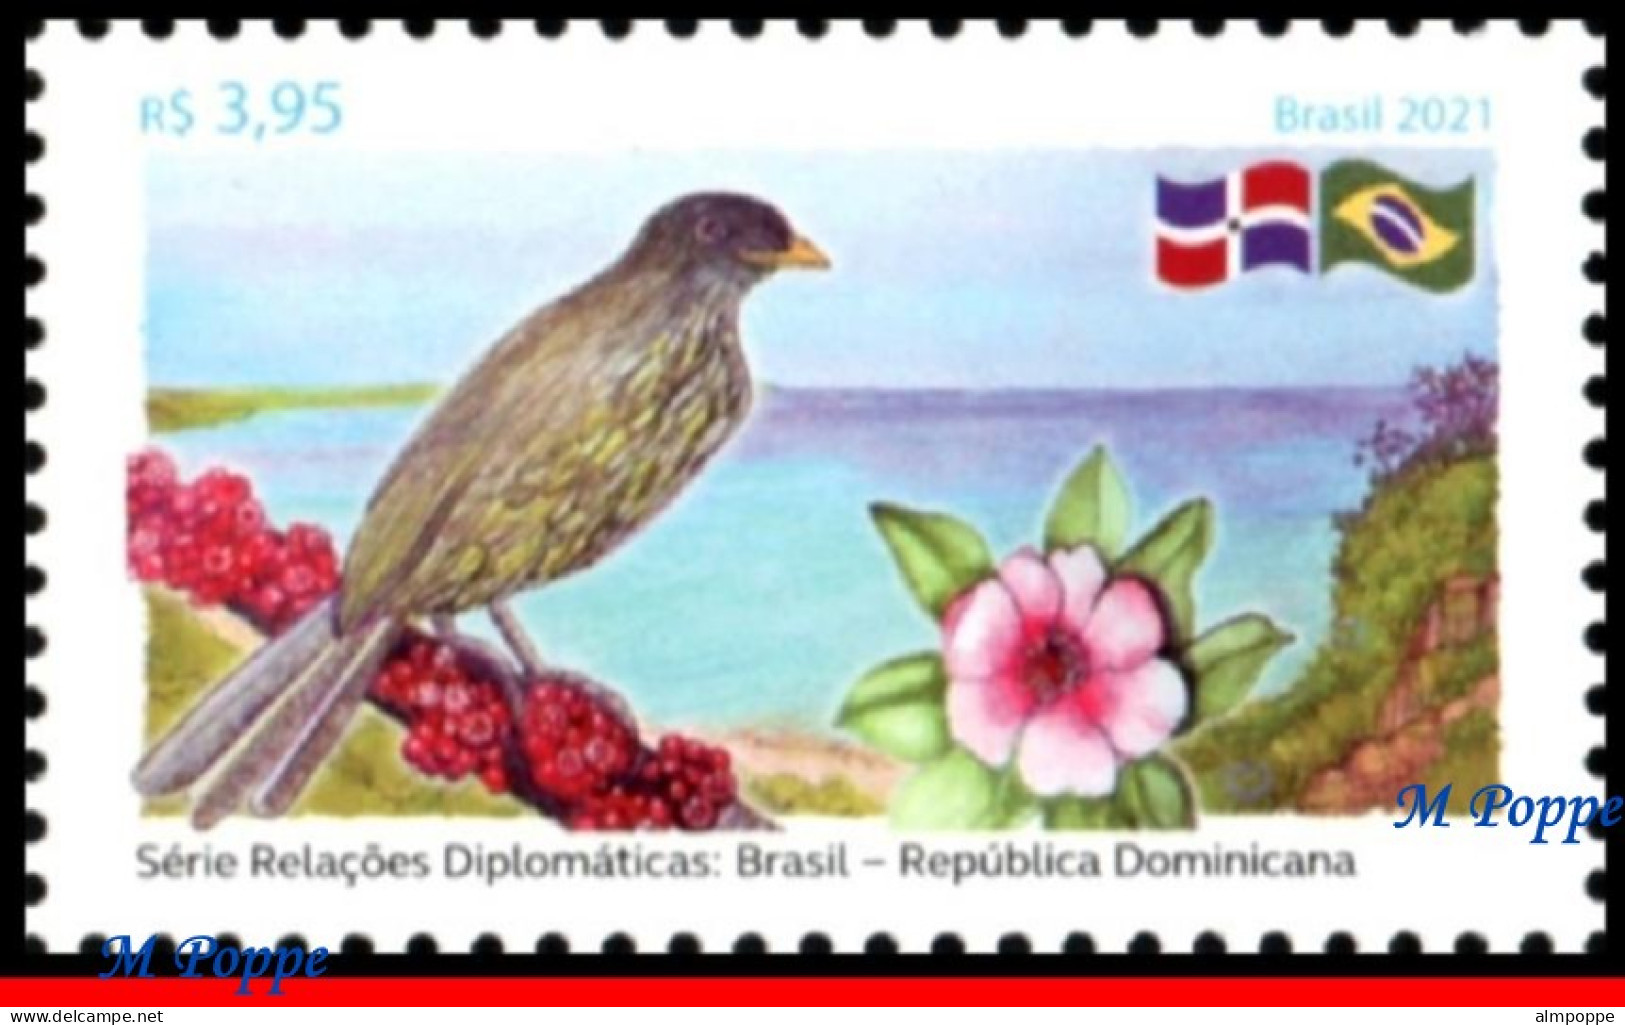 Ref. BR-V2021-03 BRAZIL 2021 - WITH DOMINICAN REPUBLIC,BIRDS, FLOWERS, BEACH, MNH, RELATIONSHIP 1V - Songbirds & Tree Dwellers